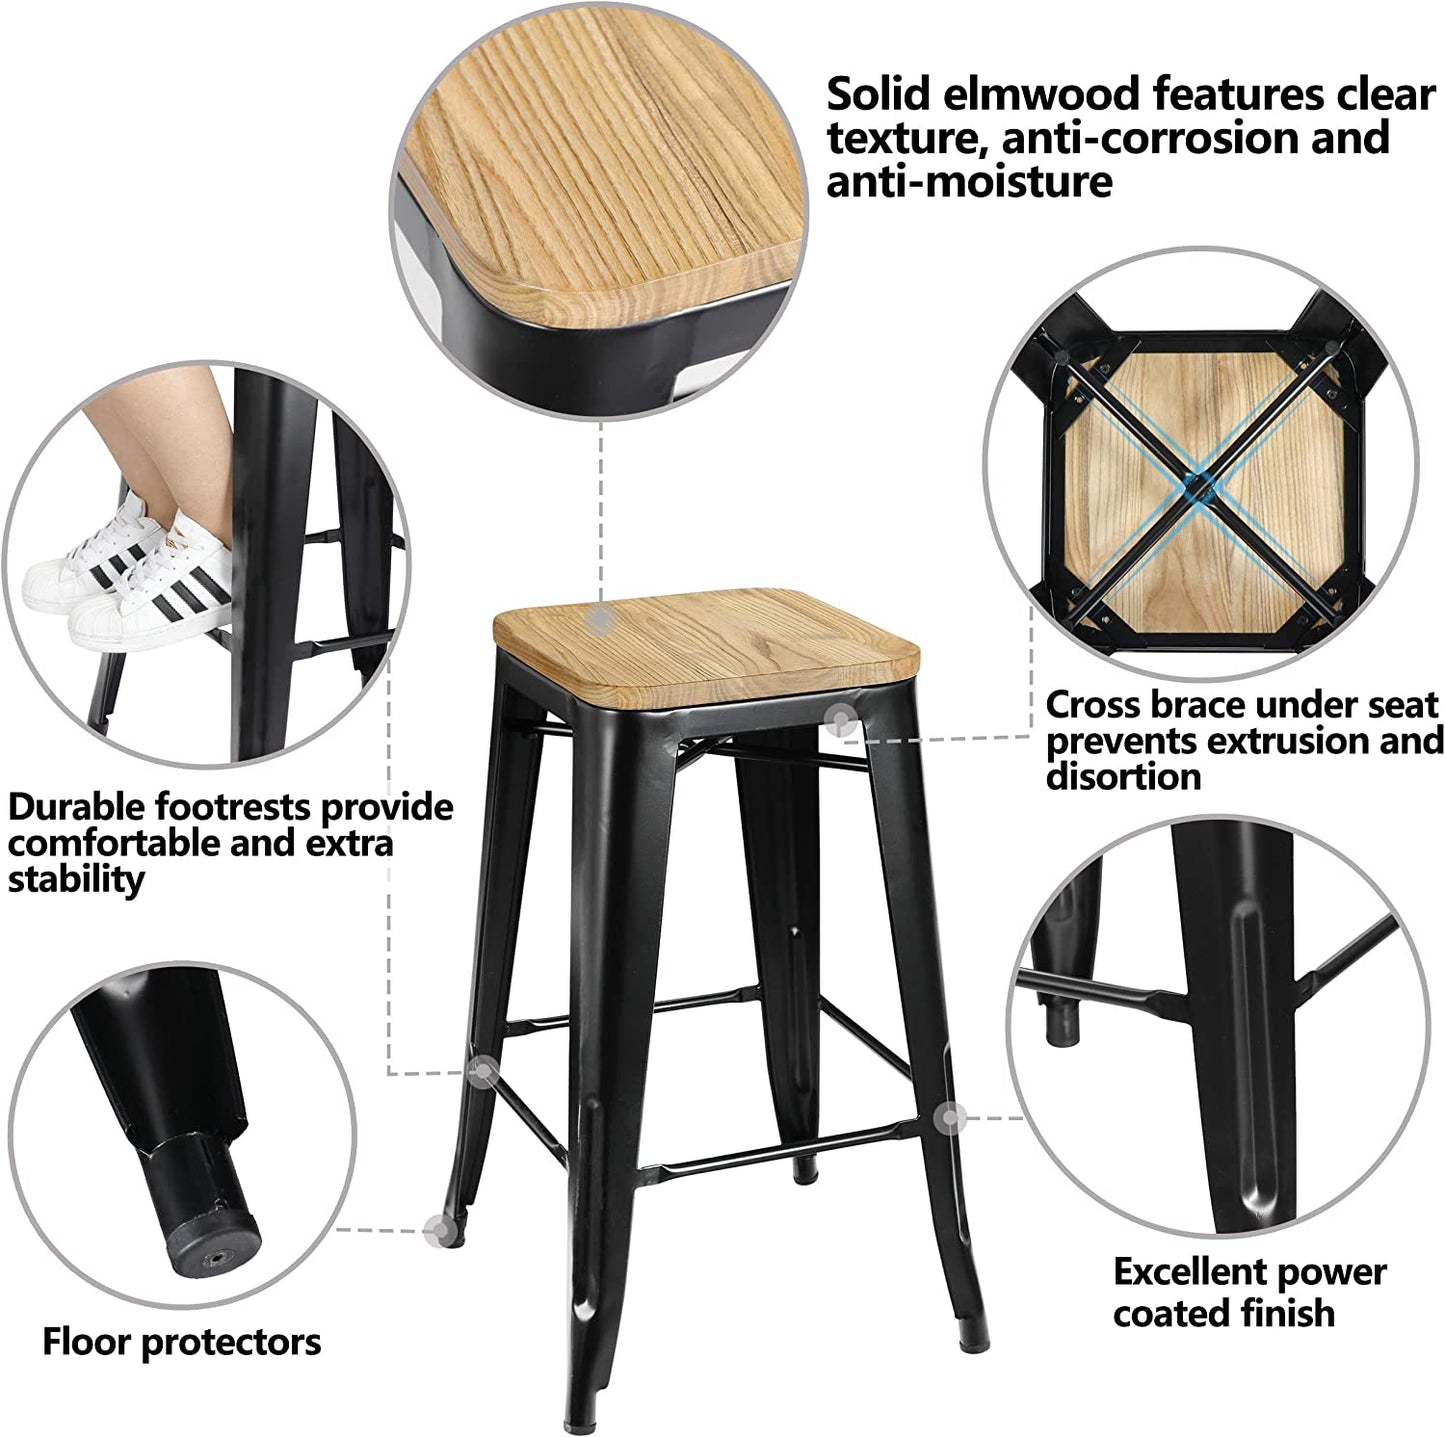 Set of 8 Metal Bar Stools 26" Counter Height with Wooden Seat Stackable Indoor/Outdoor Barstools, 330 lbs Capacity